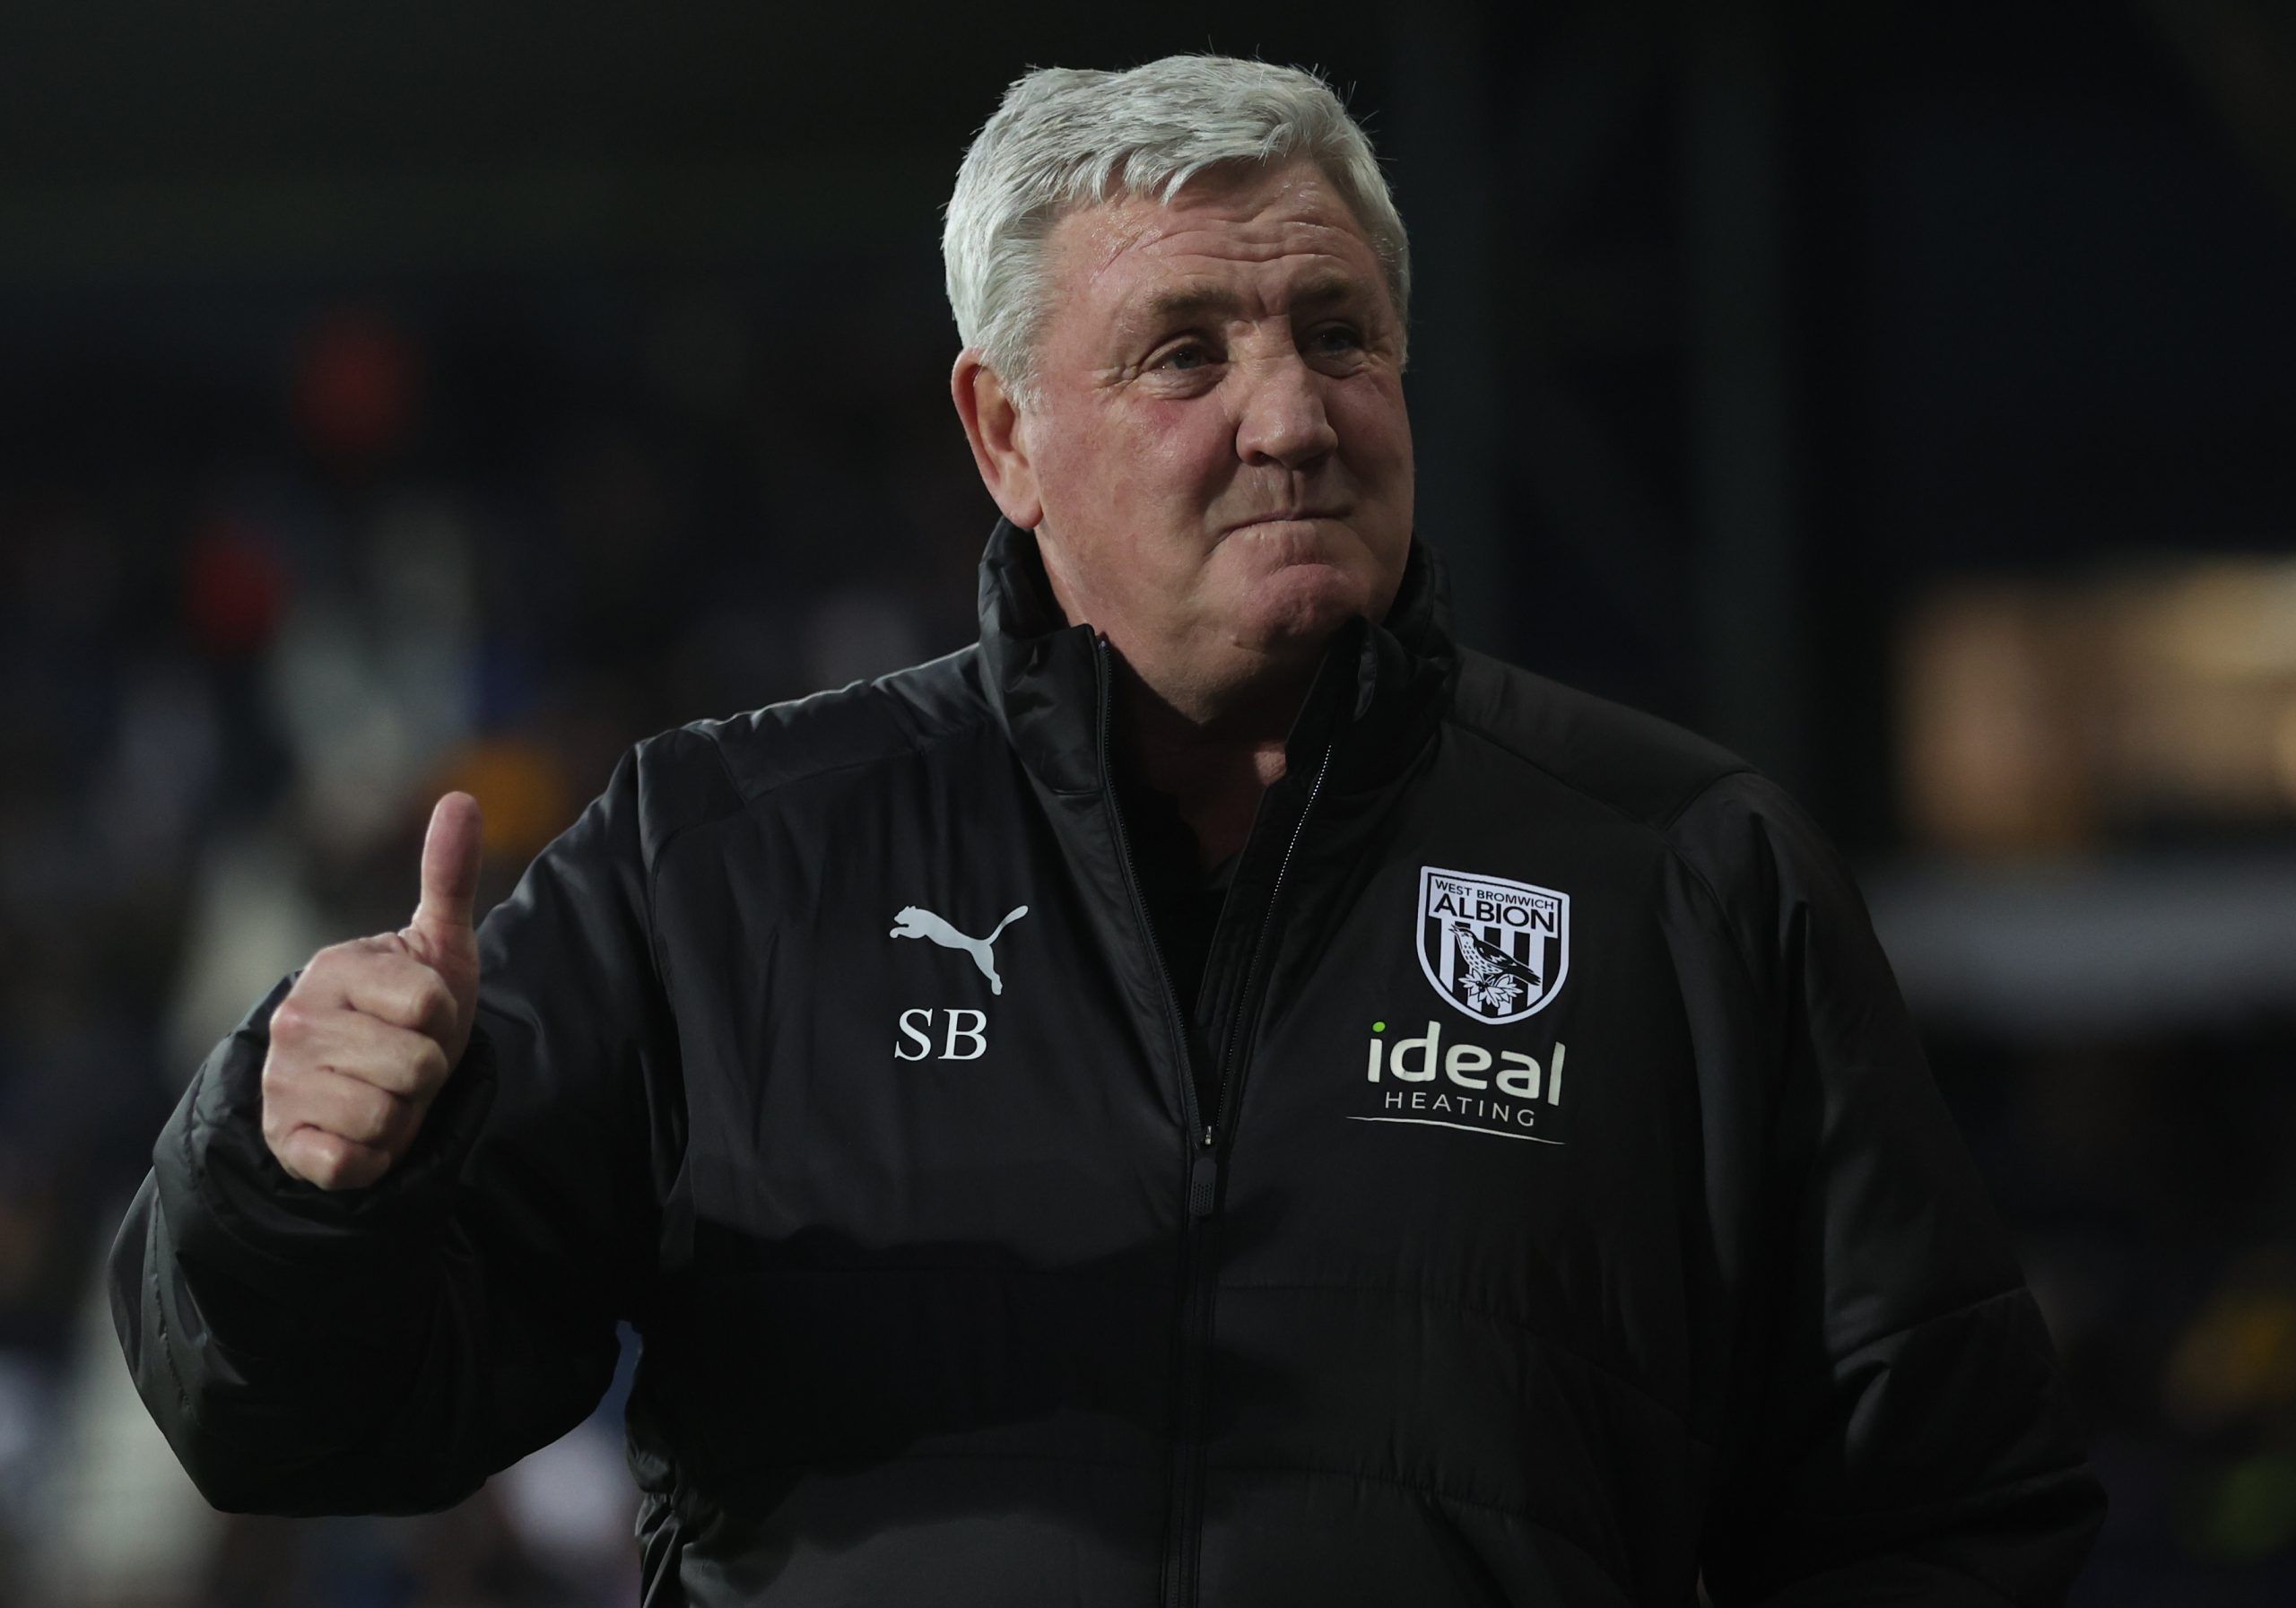 Soccer Football - Championship - West Bromwich Albion v AFC Bournemouth - The Hawthorns, West Bromwich, Britain - April 6, 2022 West Bromwich Albion manager Steve Bruce before the match Action Images/Carl Recine EDITORIAL USE ONLY. No use with unauthorized audio, video, data, fixture lists, club/league logos or 'live' services. Online in-match use limited to 75 images, no video emulation. No use in betting, games or single club /league/player publications.  Please contact your account representa